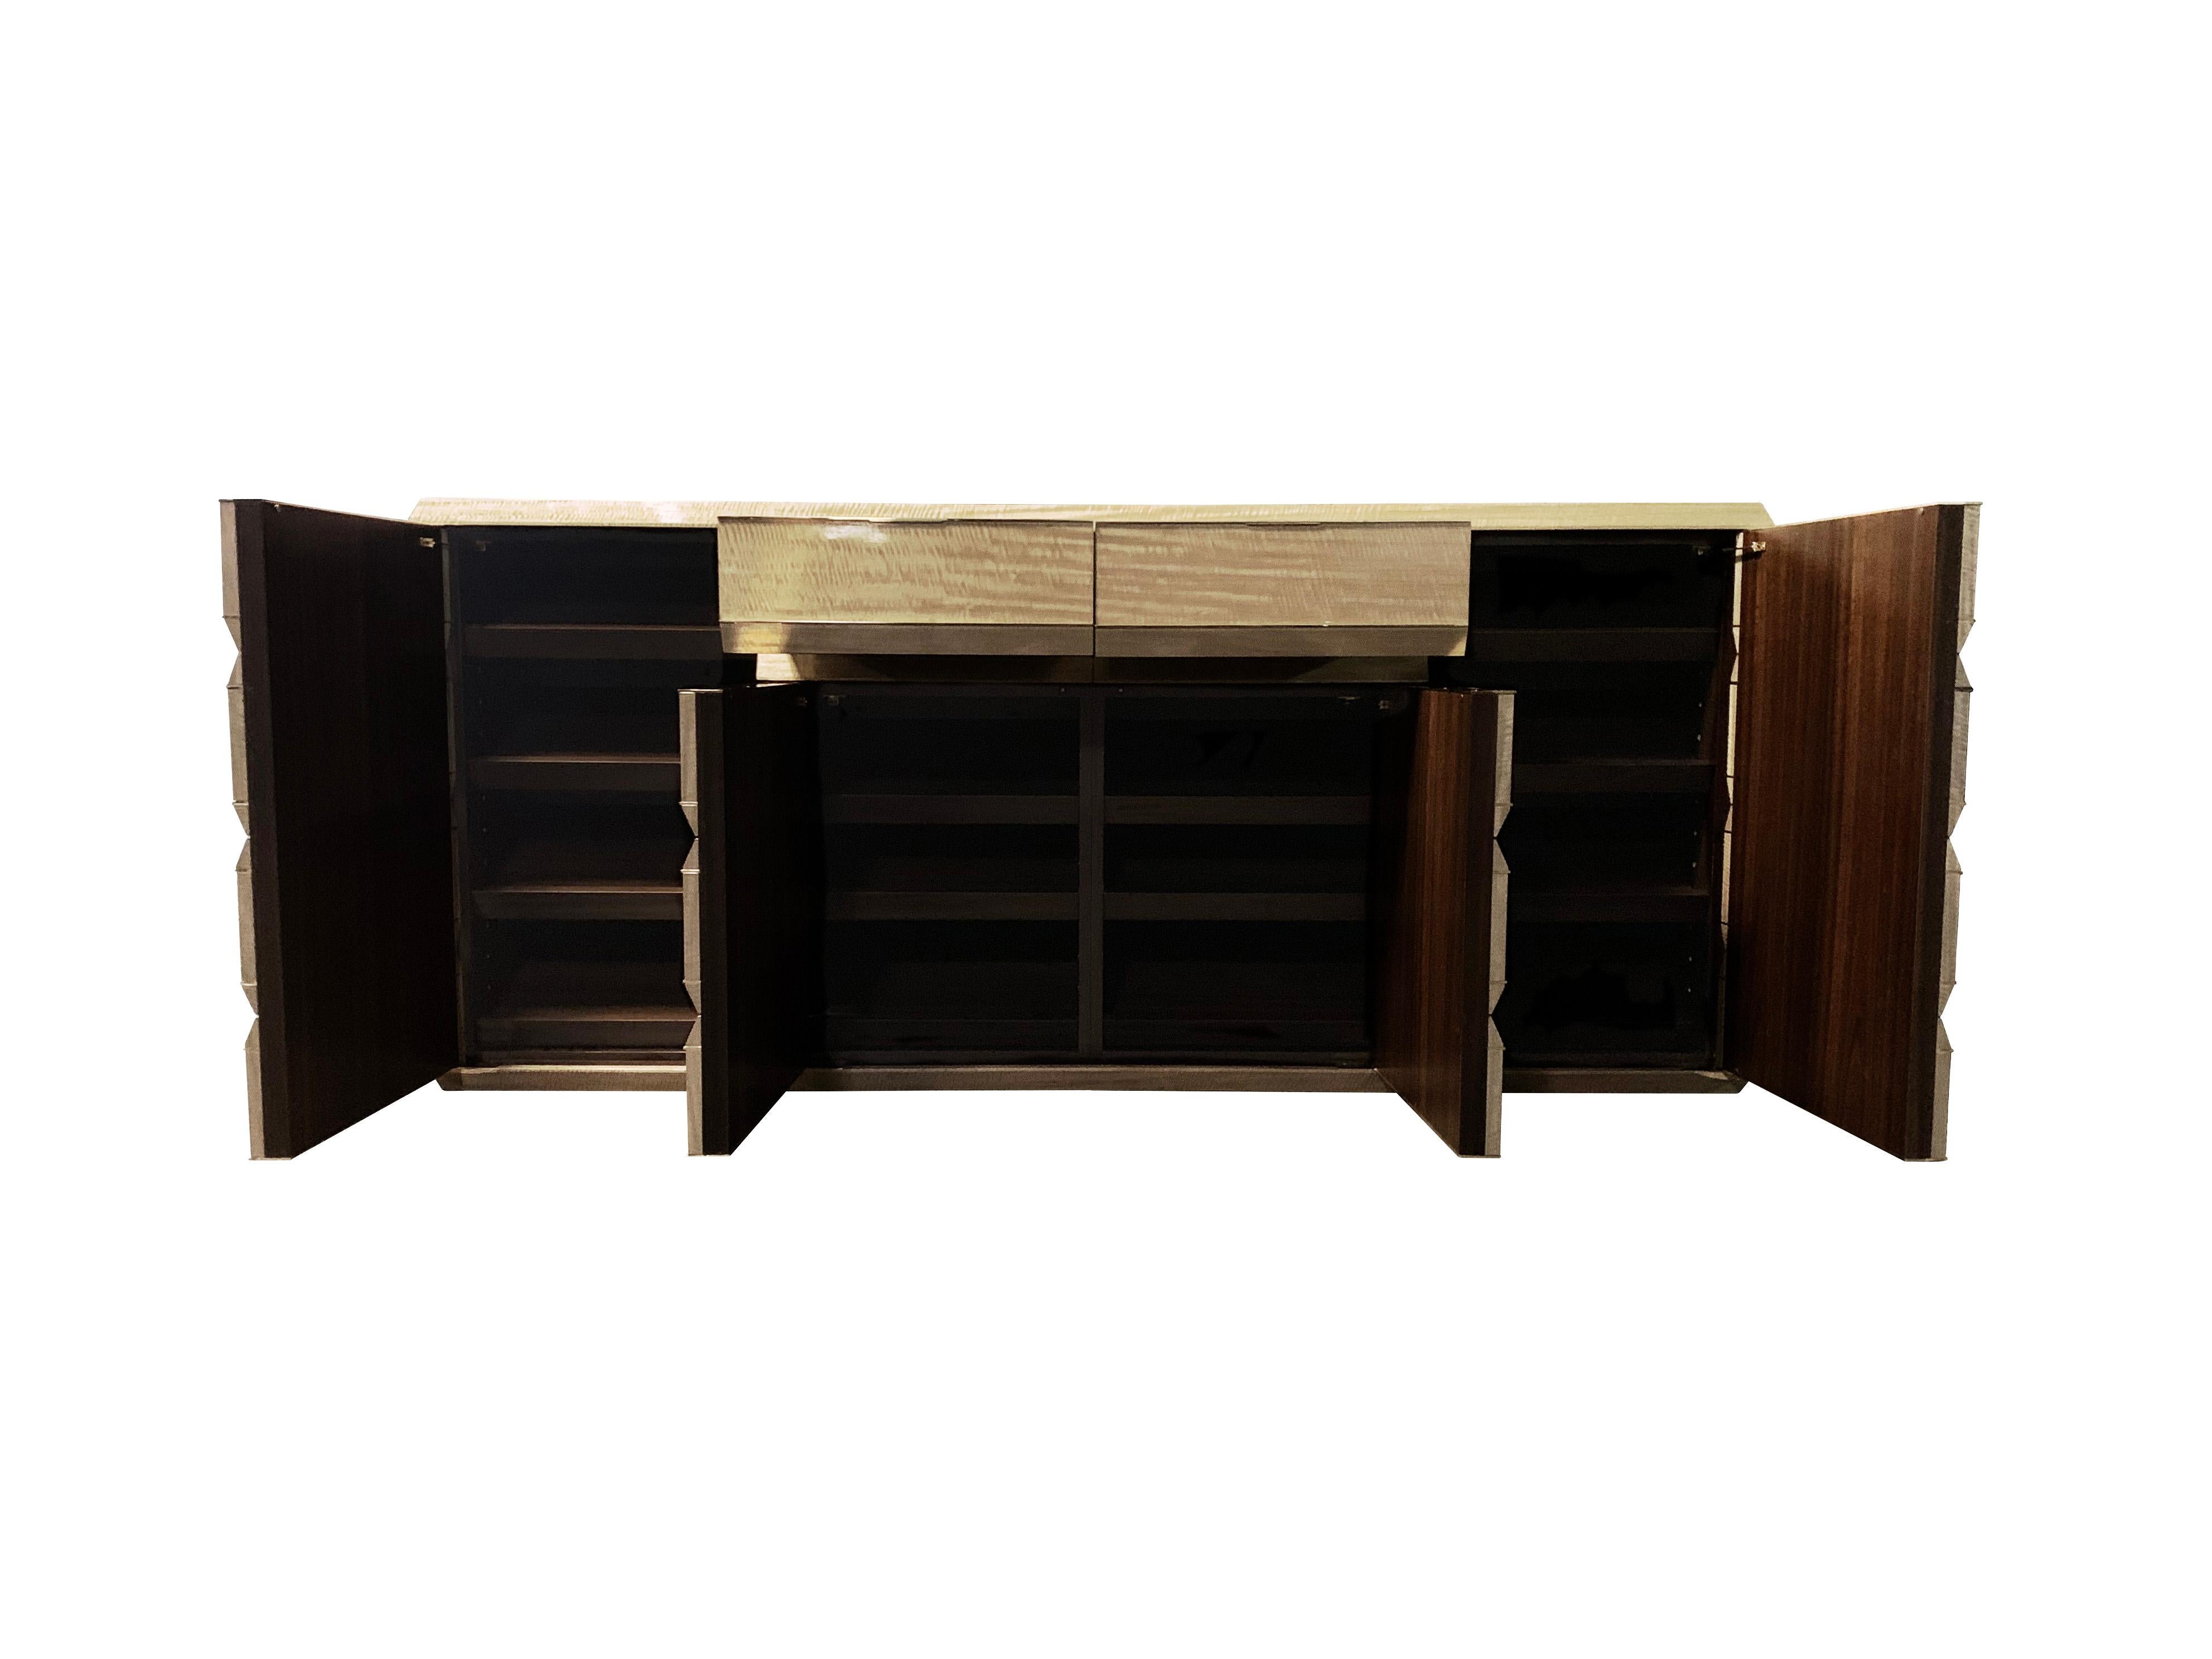 Contemporary Tanganyika wood, brass, and polished stone bedroom credenza shoe cabinets 

A pair of custom Tanganyika wood bedroom shoe credenza’s designed by London based Interior Designer Martin Kemp. Created and assembled by the esteemed English